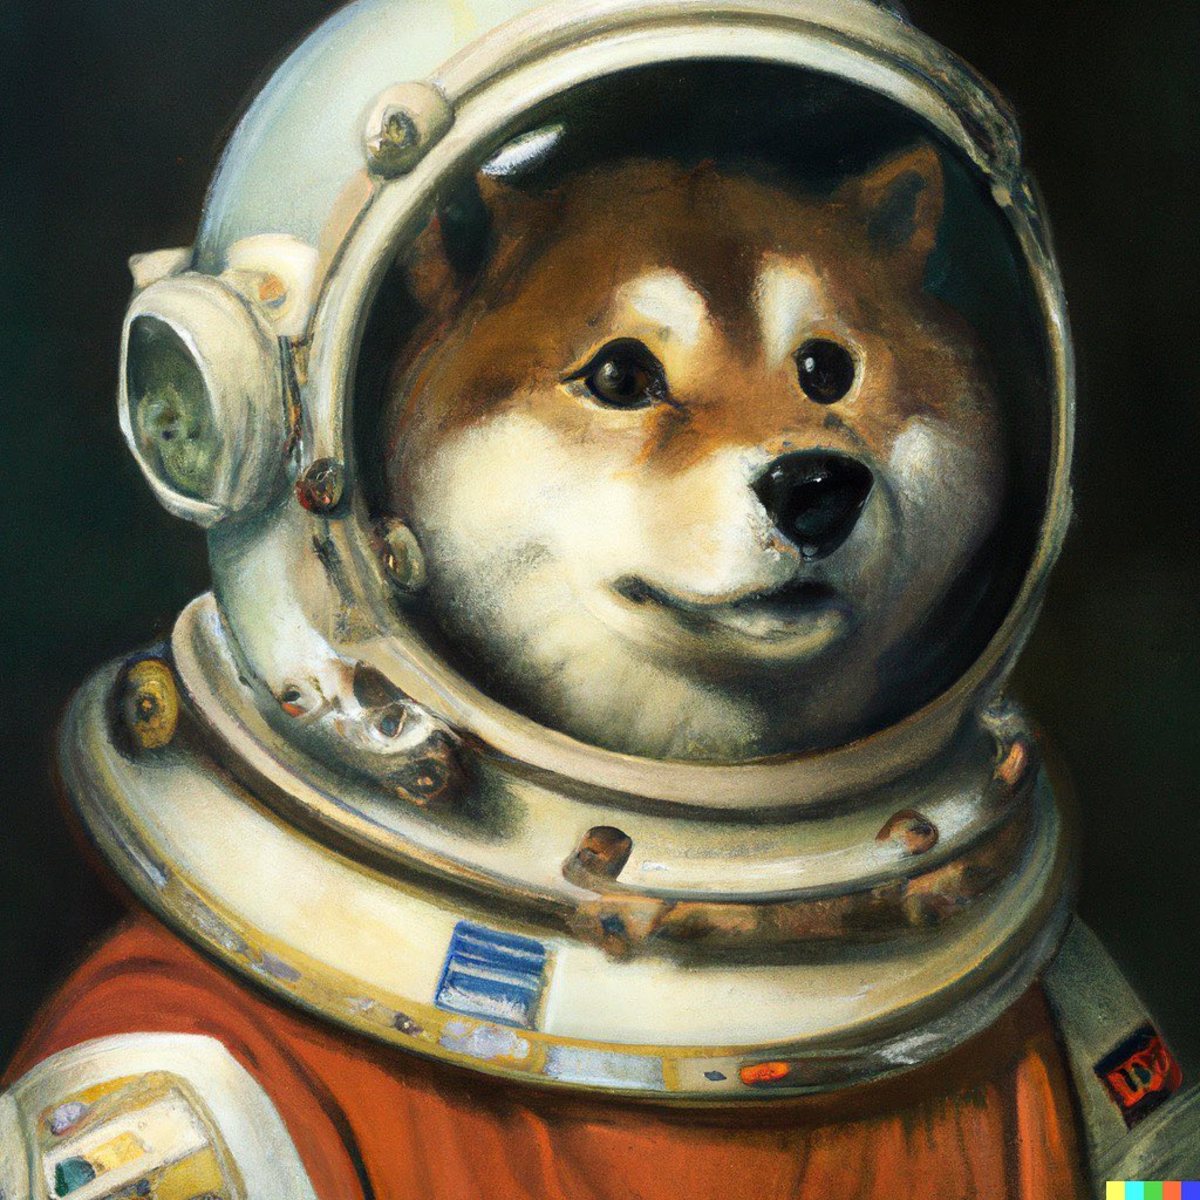 Portrait of a shiba inu astronaut, oil painting, 16th century (actual text prompt used)